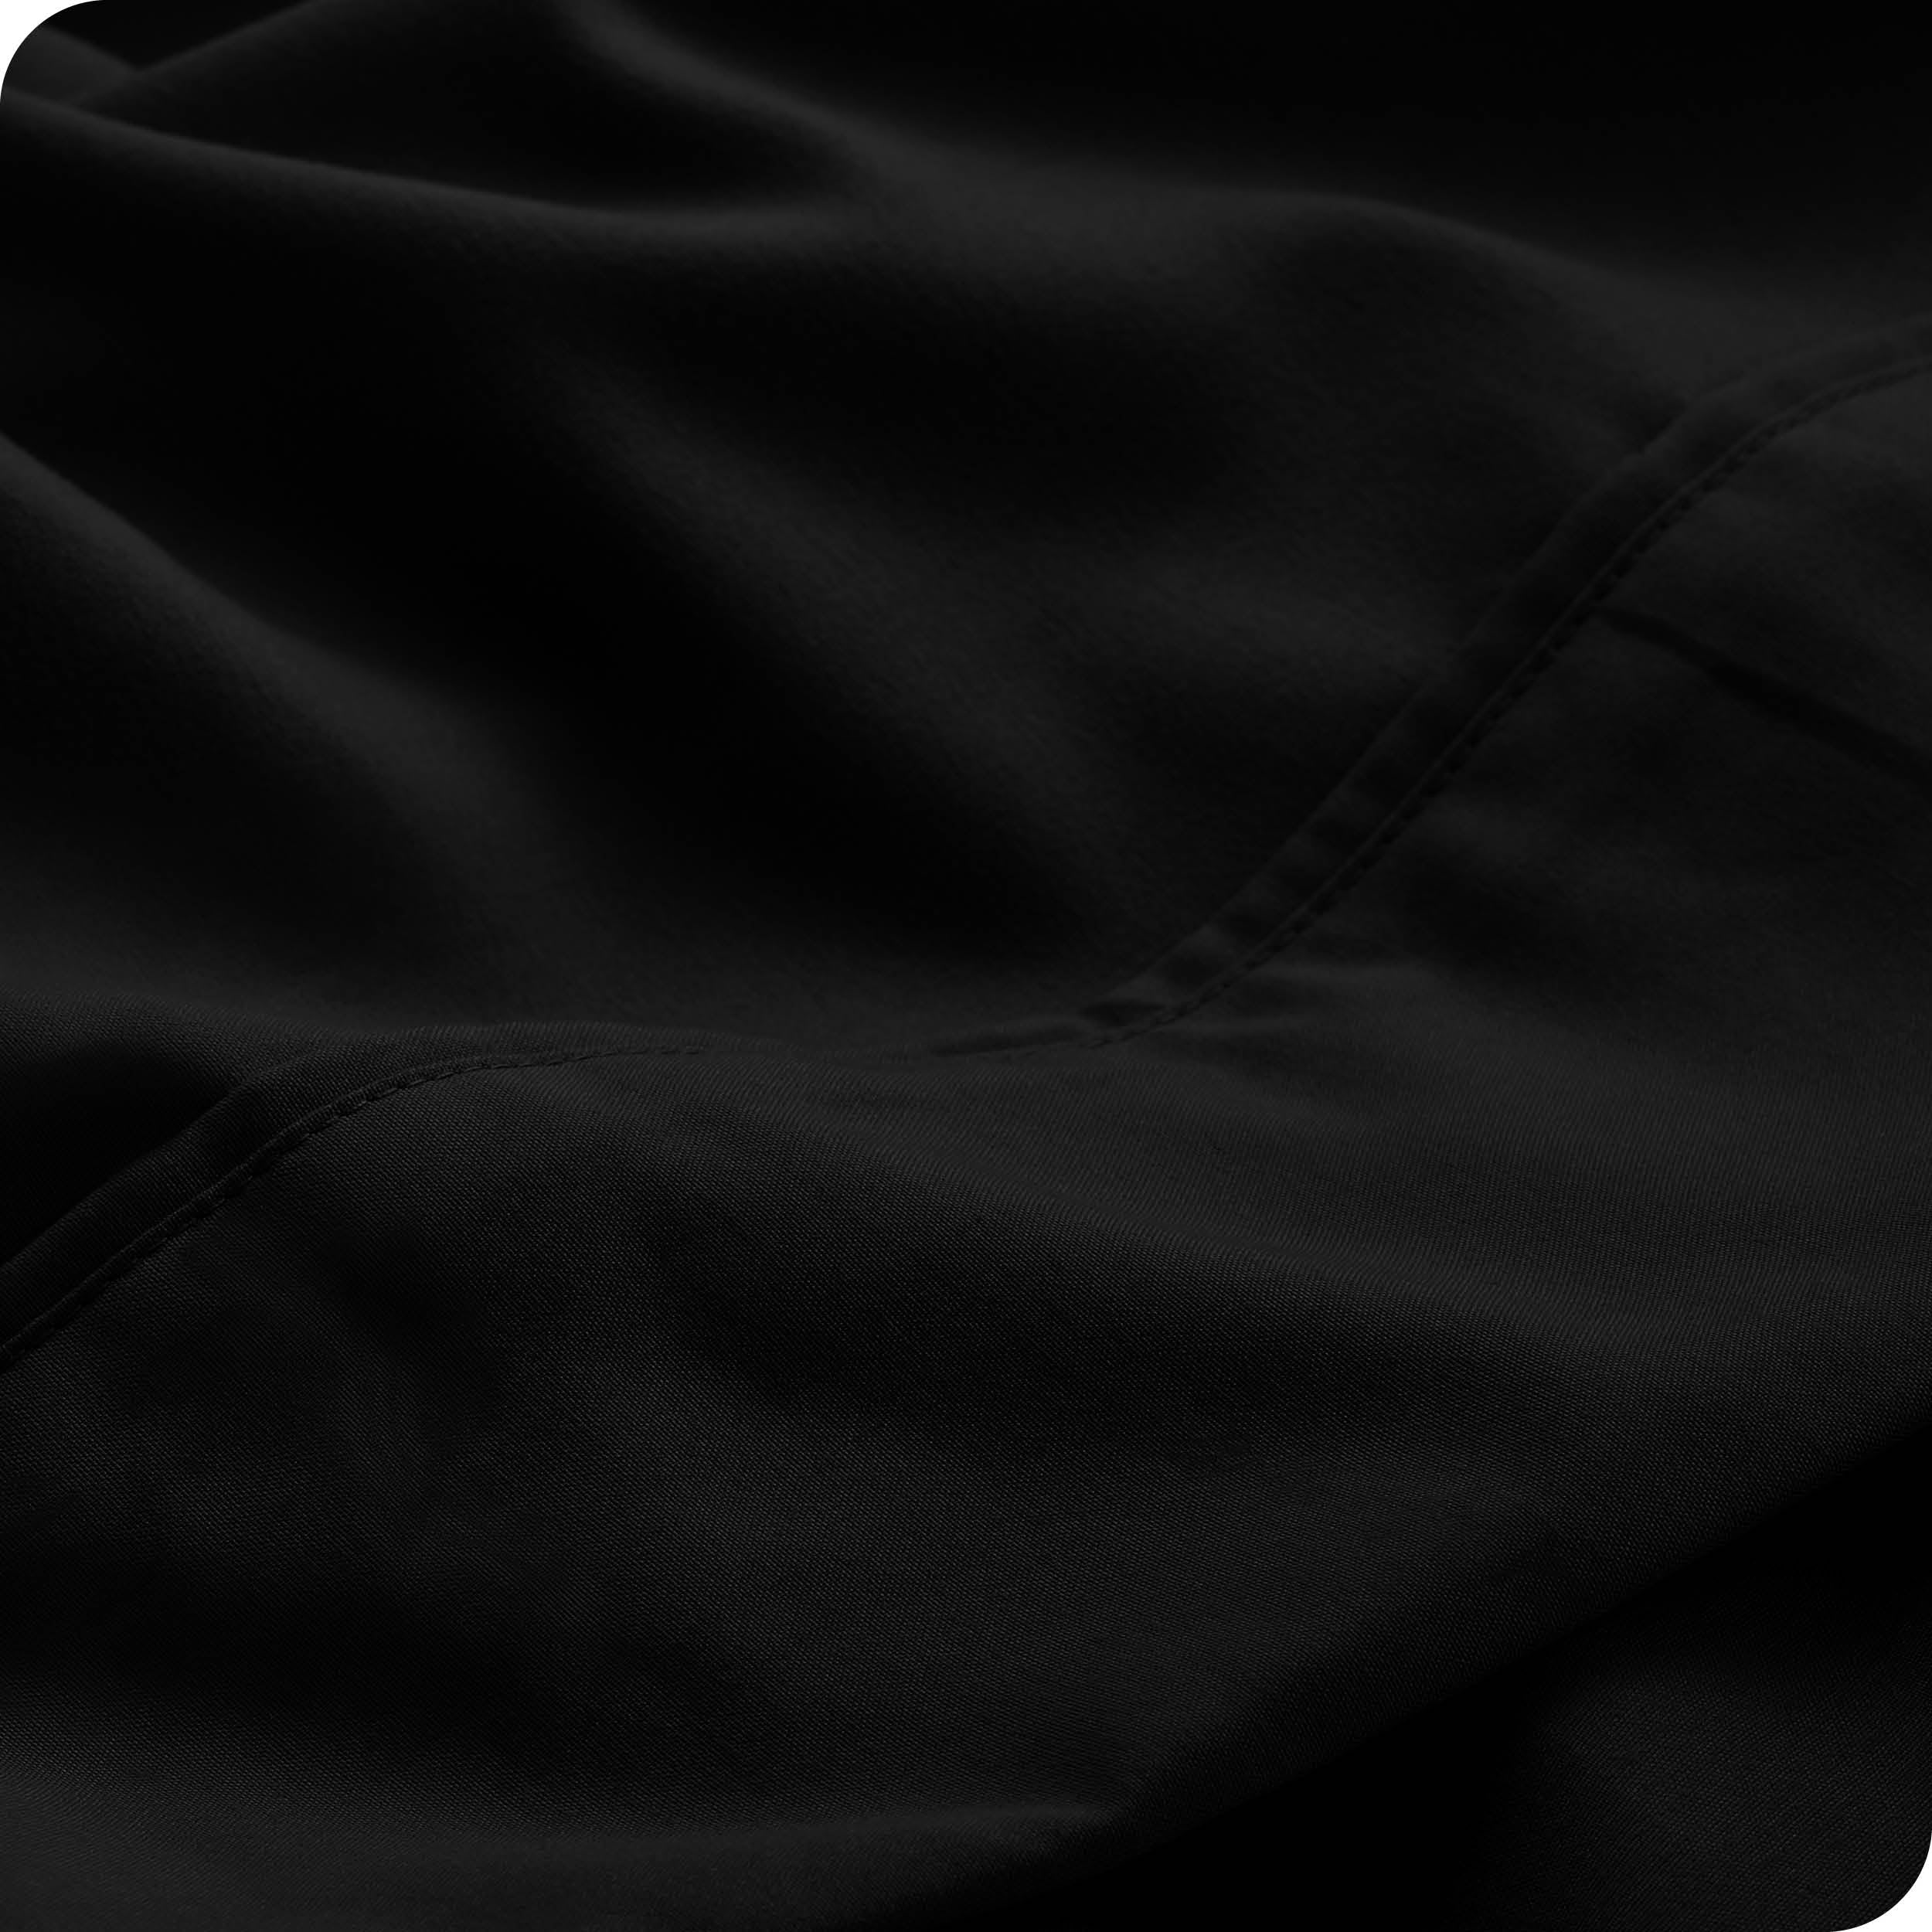 Close up of a black microfiber sheet showing the stitching and texture